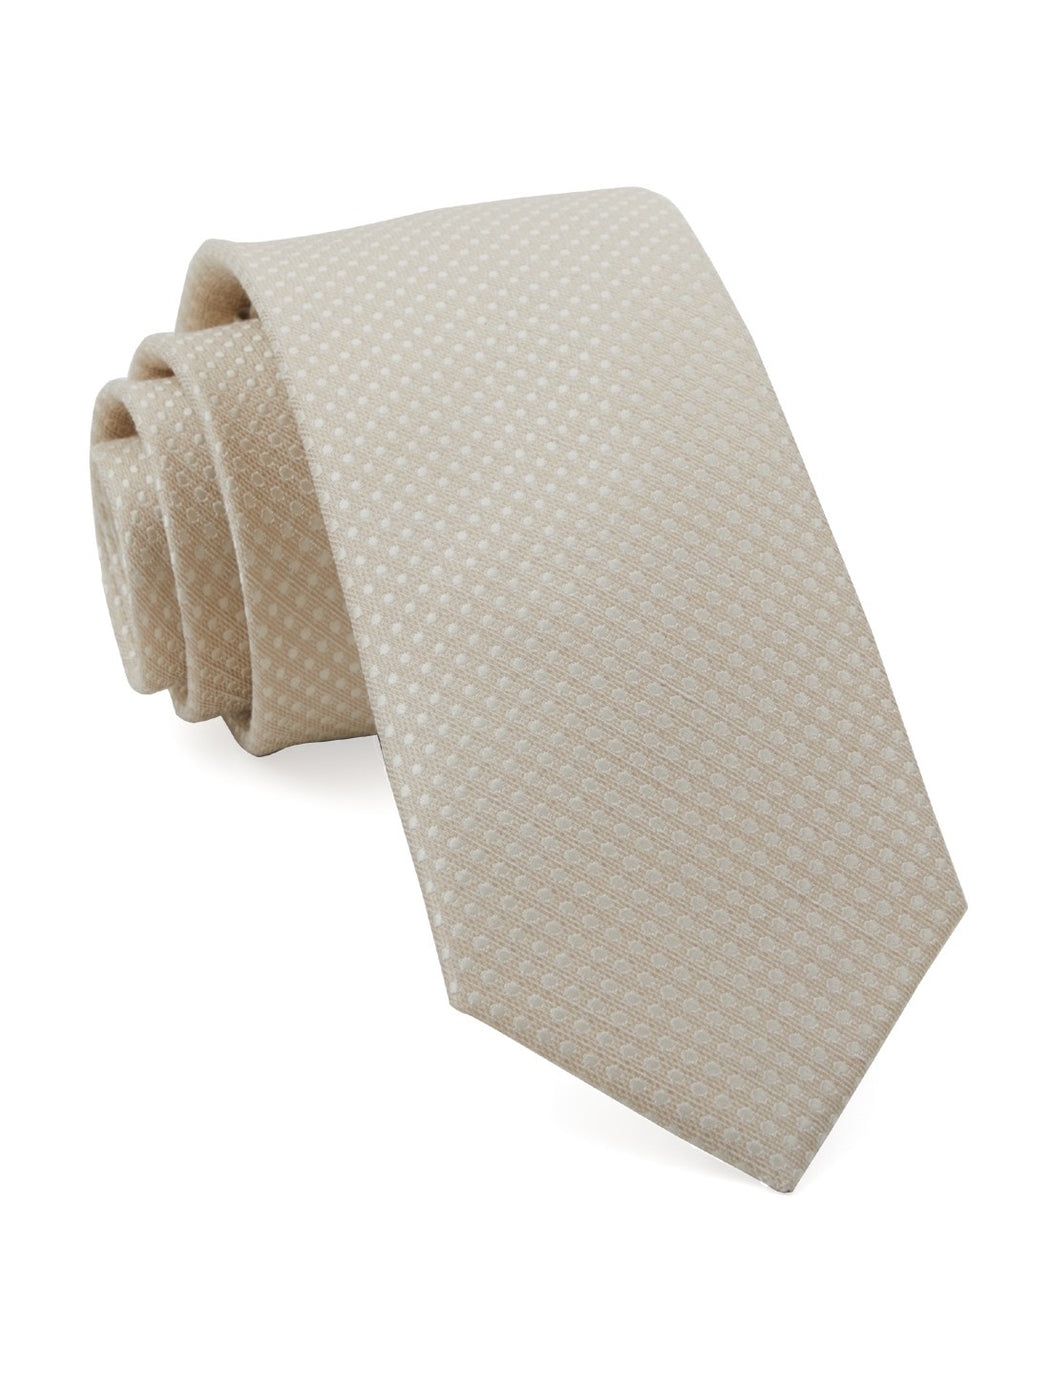 Dotted Spin Light Champagne Tie | Linen Ties | Tie Bar